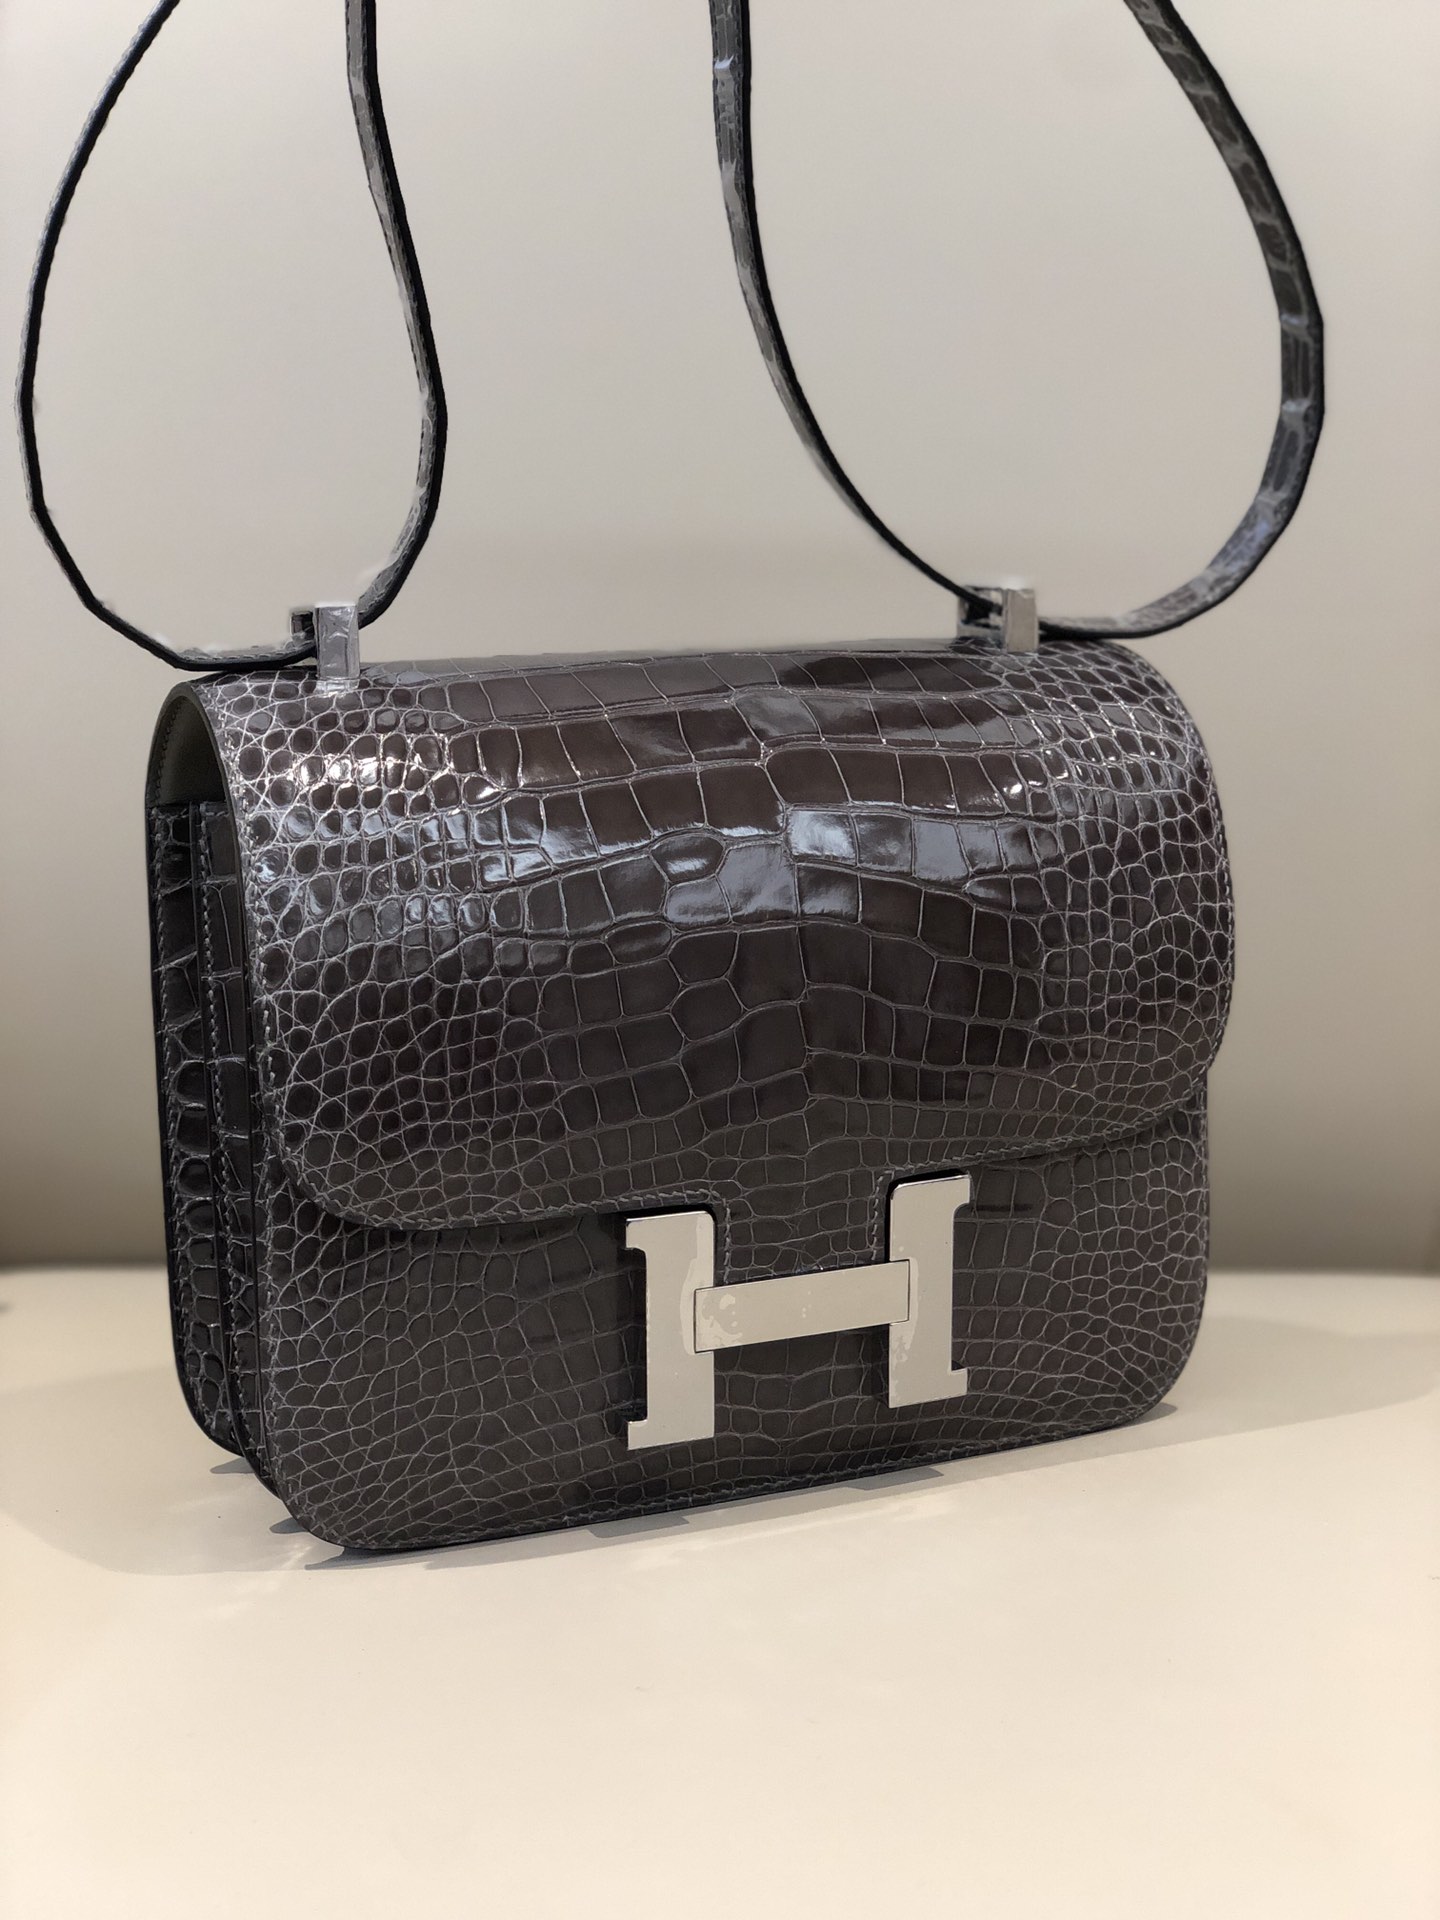 Hermès Graphite Constance 25cm of Ostrich with Brushed Palladium Hardware, Handbags and Accessories Online, Ecommerce Retail